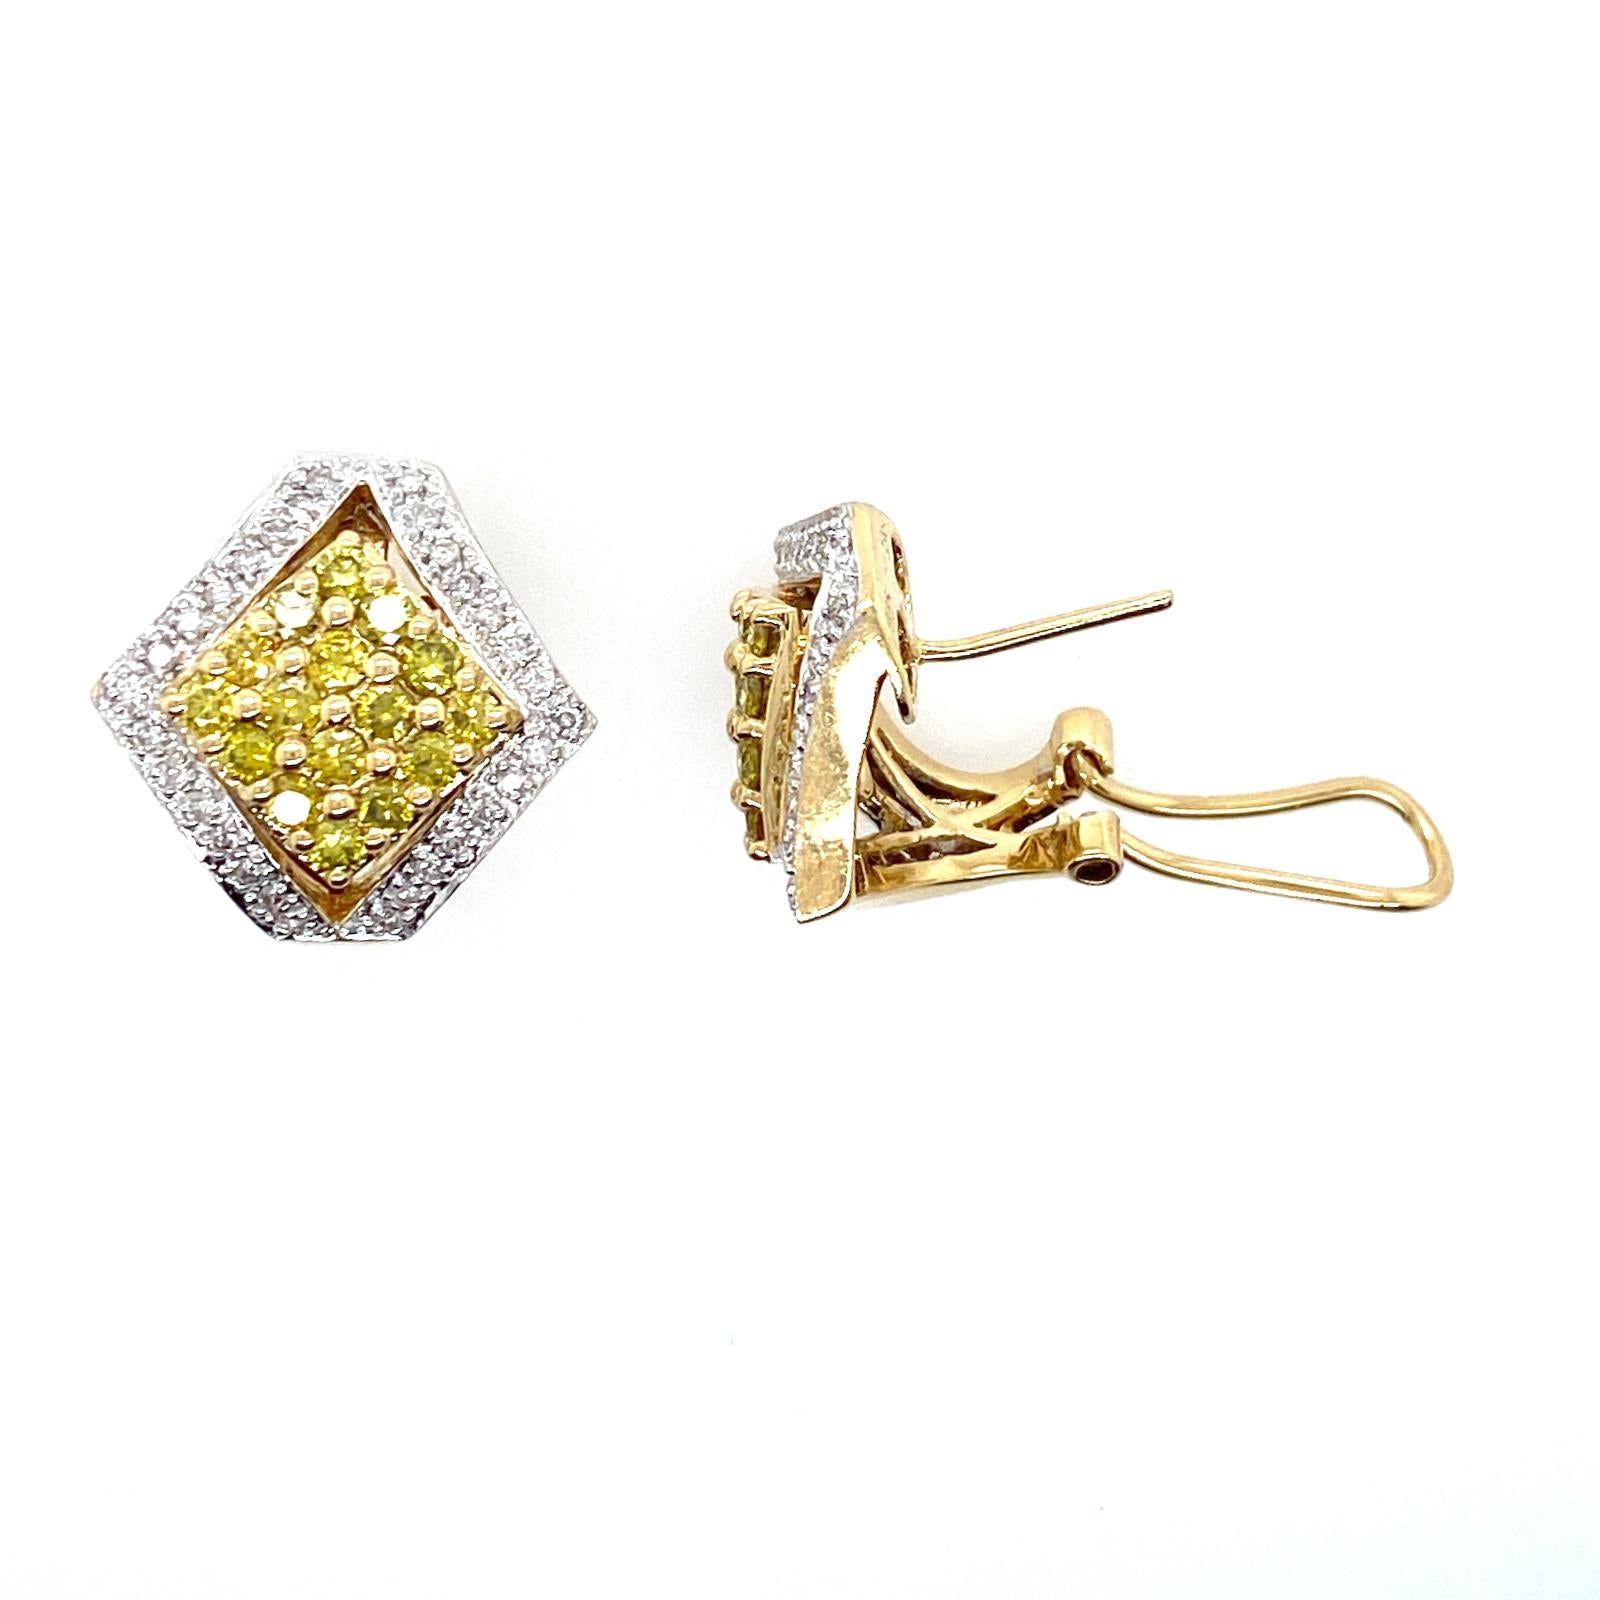 Beautiful diamond shape earrings fashioned in 14 karat white gold. The earrings feature 32 round brilliant yellow diamonds weighing approximately 2.00 carat total weight. The yellow diamonds are framed by 60 white round brilliant cut diamonds